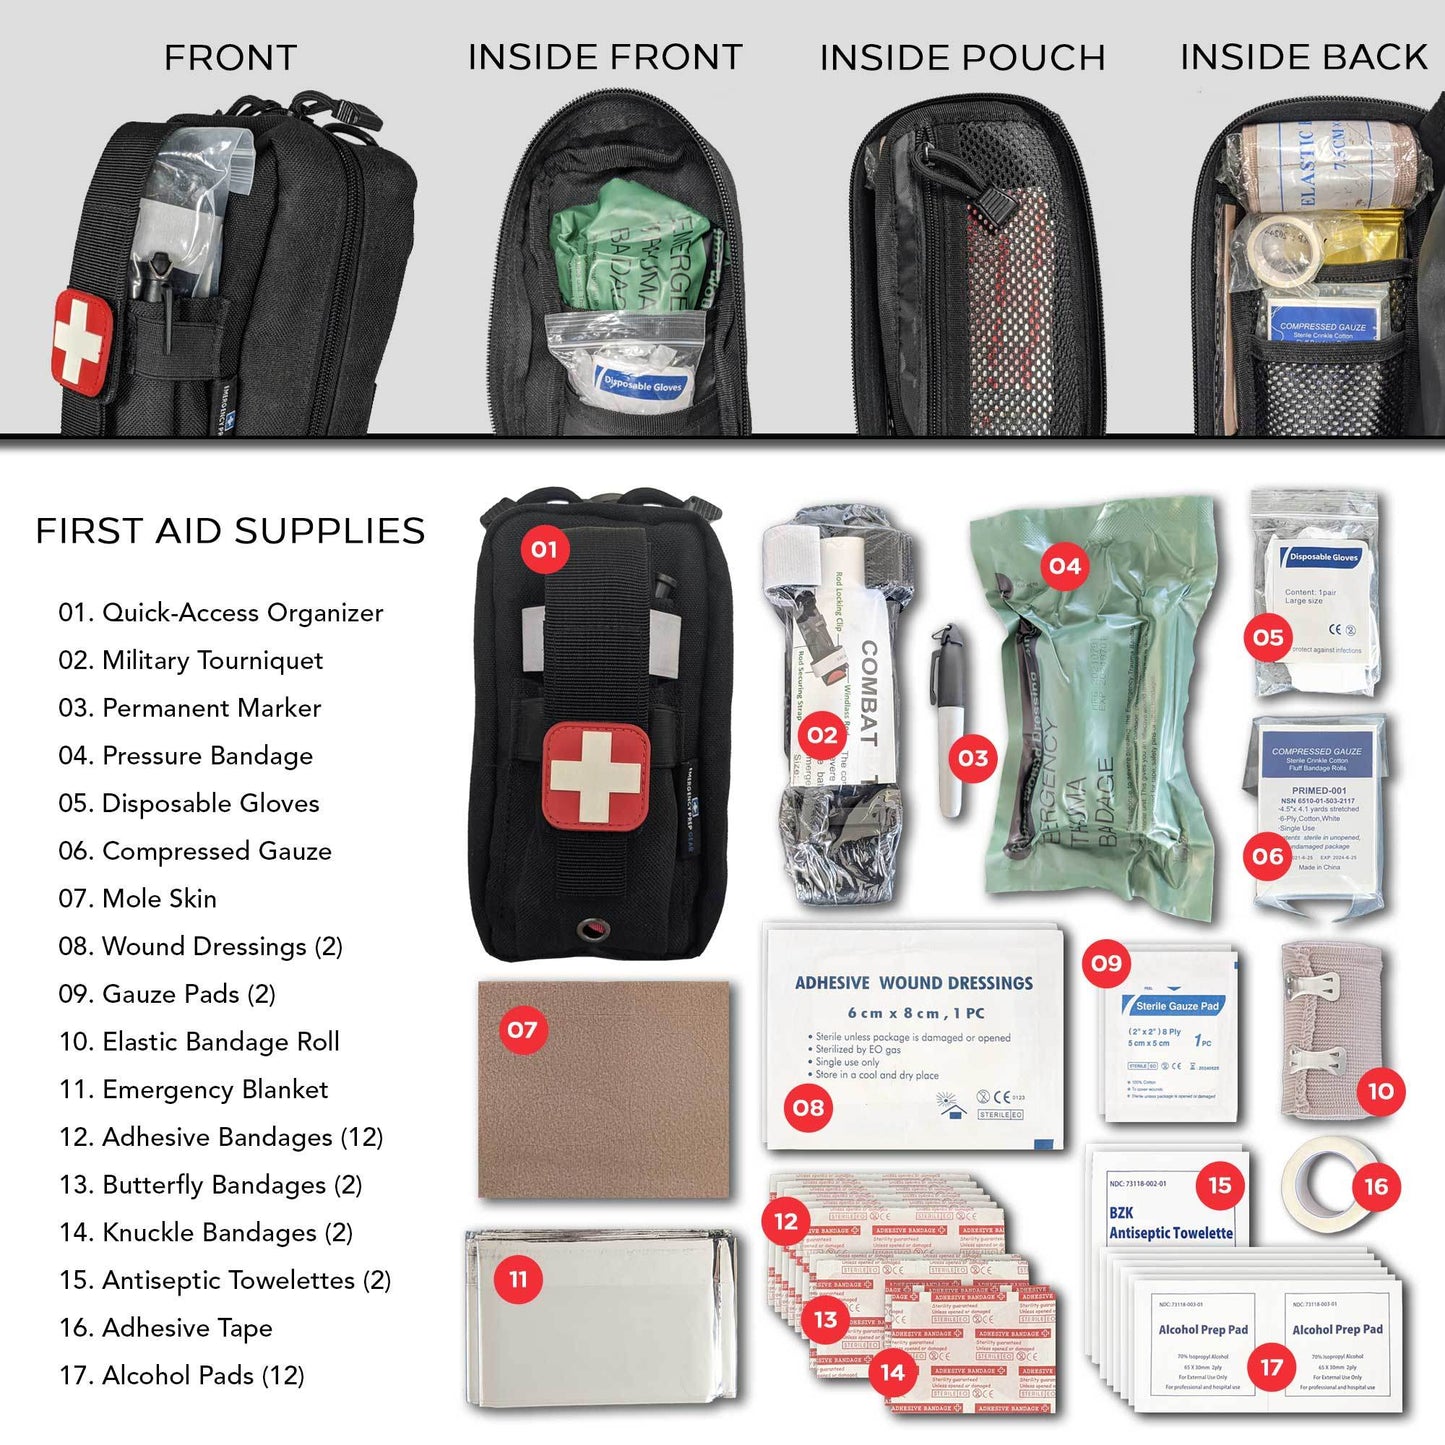 Field First Aid Kit (IFAK) | 44 Piece | Compact Personal First Aid Kit | Backpacking;  Camping;  Emergency;  Travel;  Tactical;  Go Bag;  Bug Out Bag;  72 Hour Kit;  Essentials;  Survival IFAK